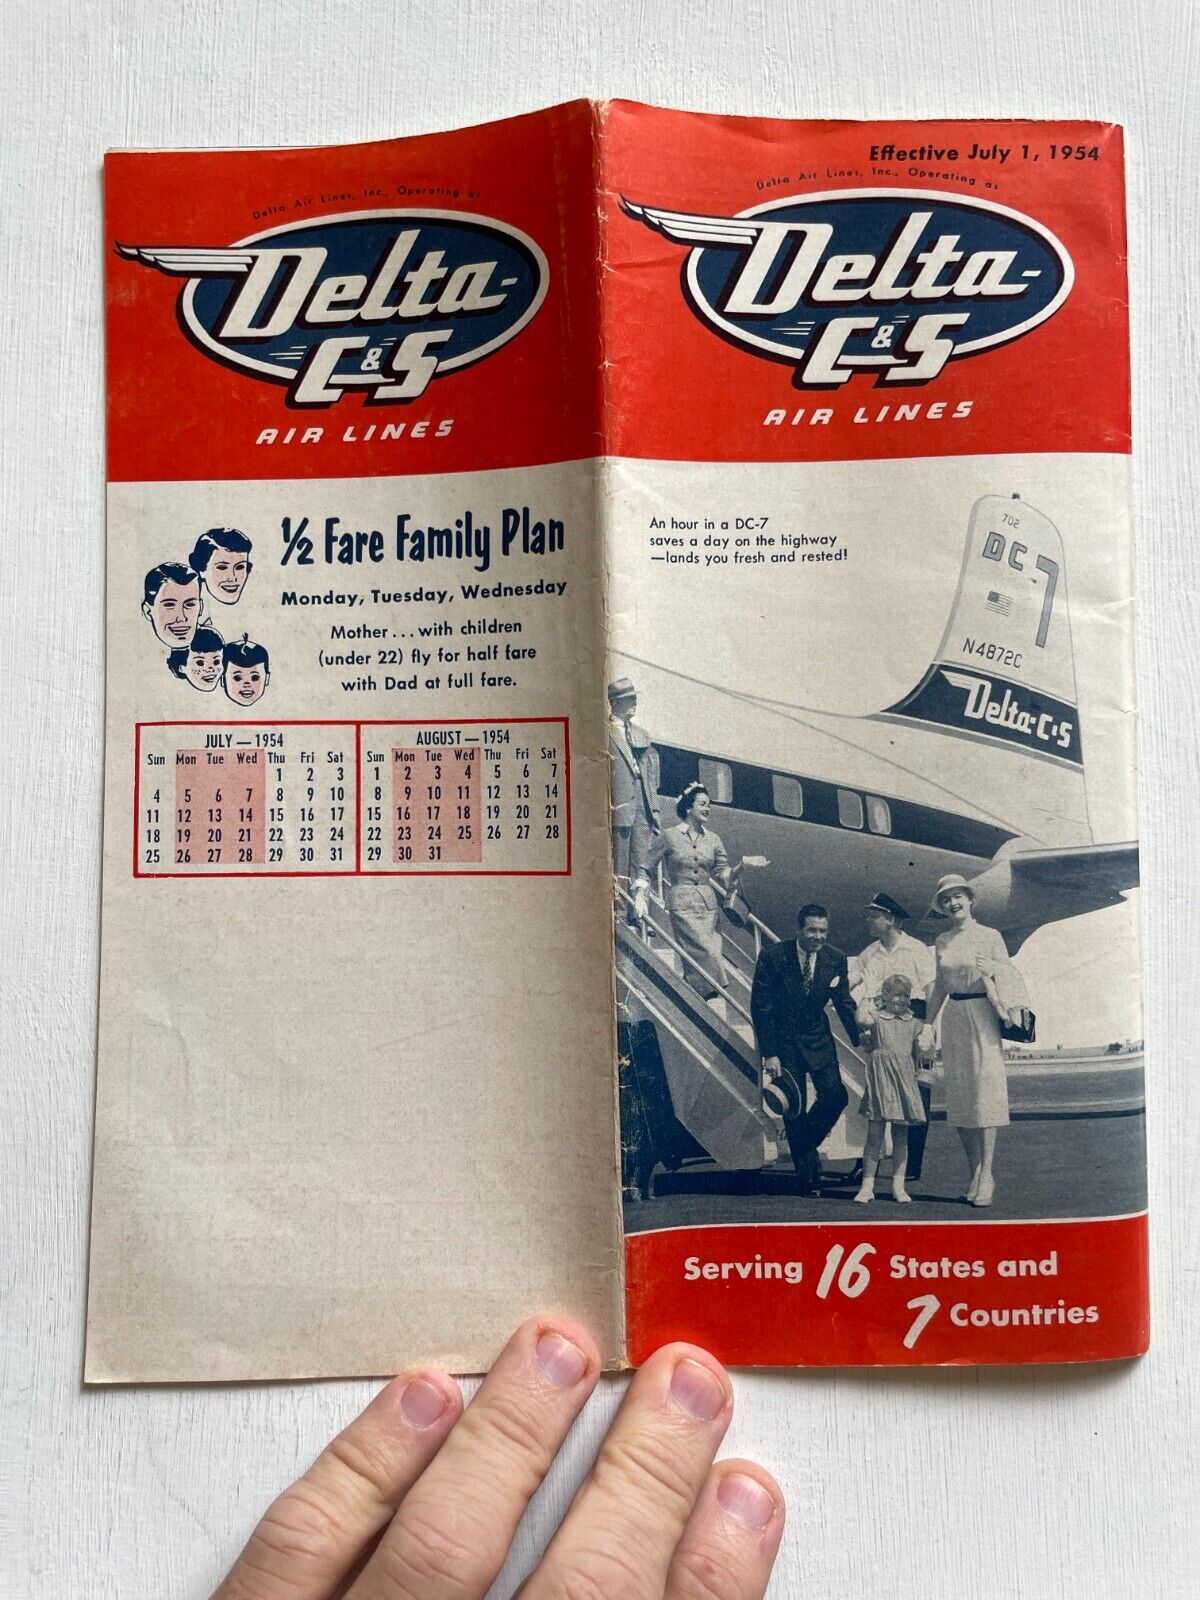 1954 Delta- C&S Airlines Timetable